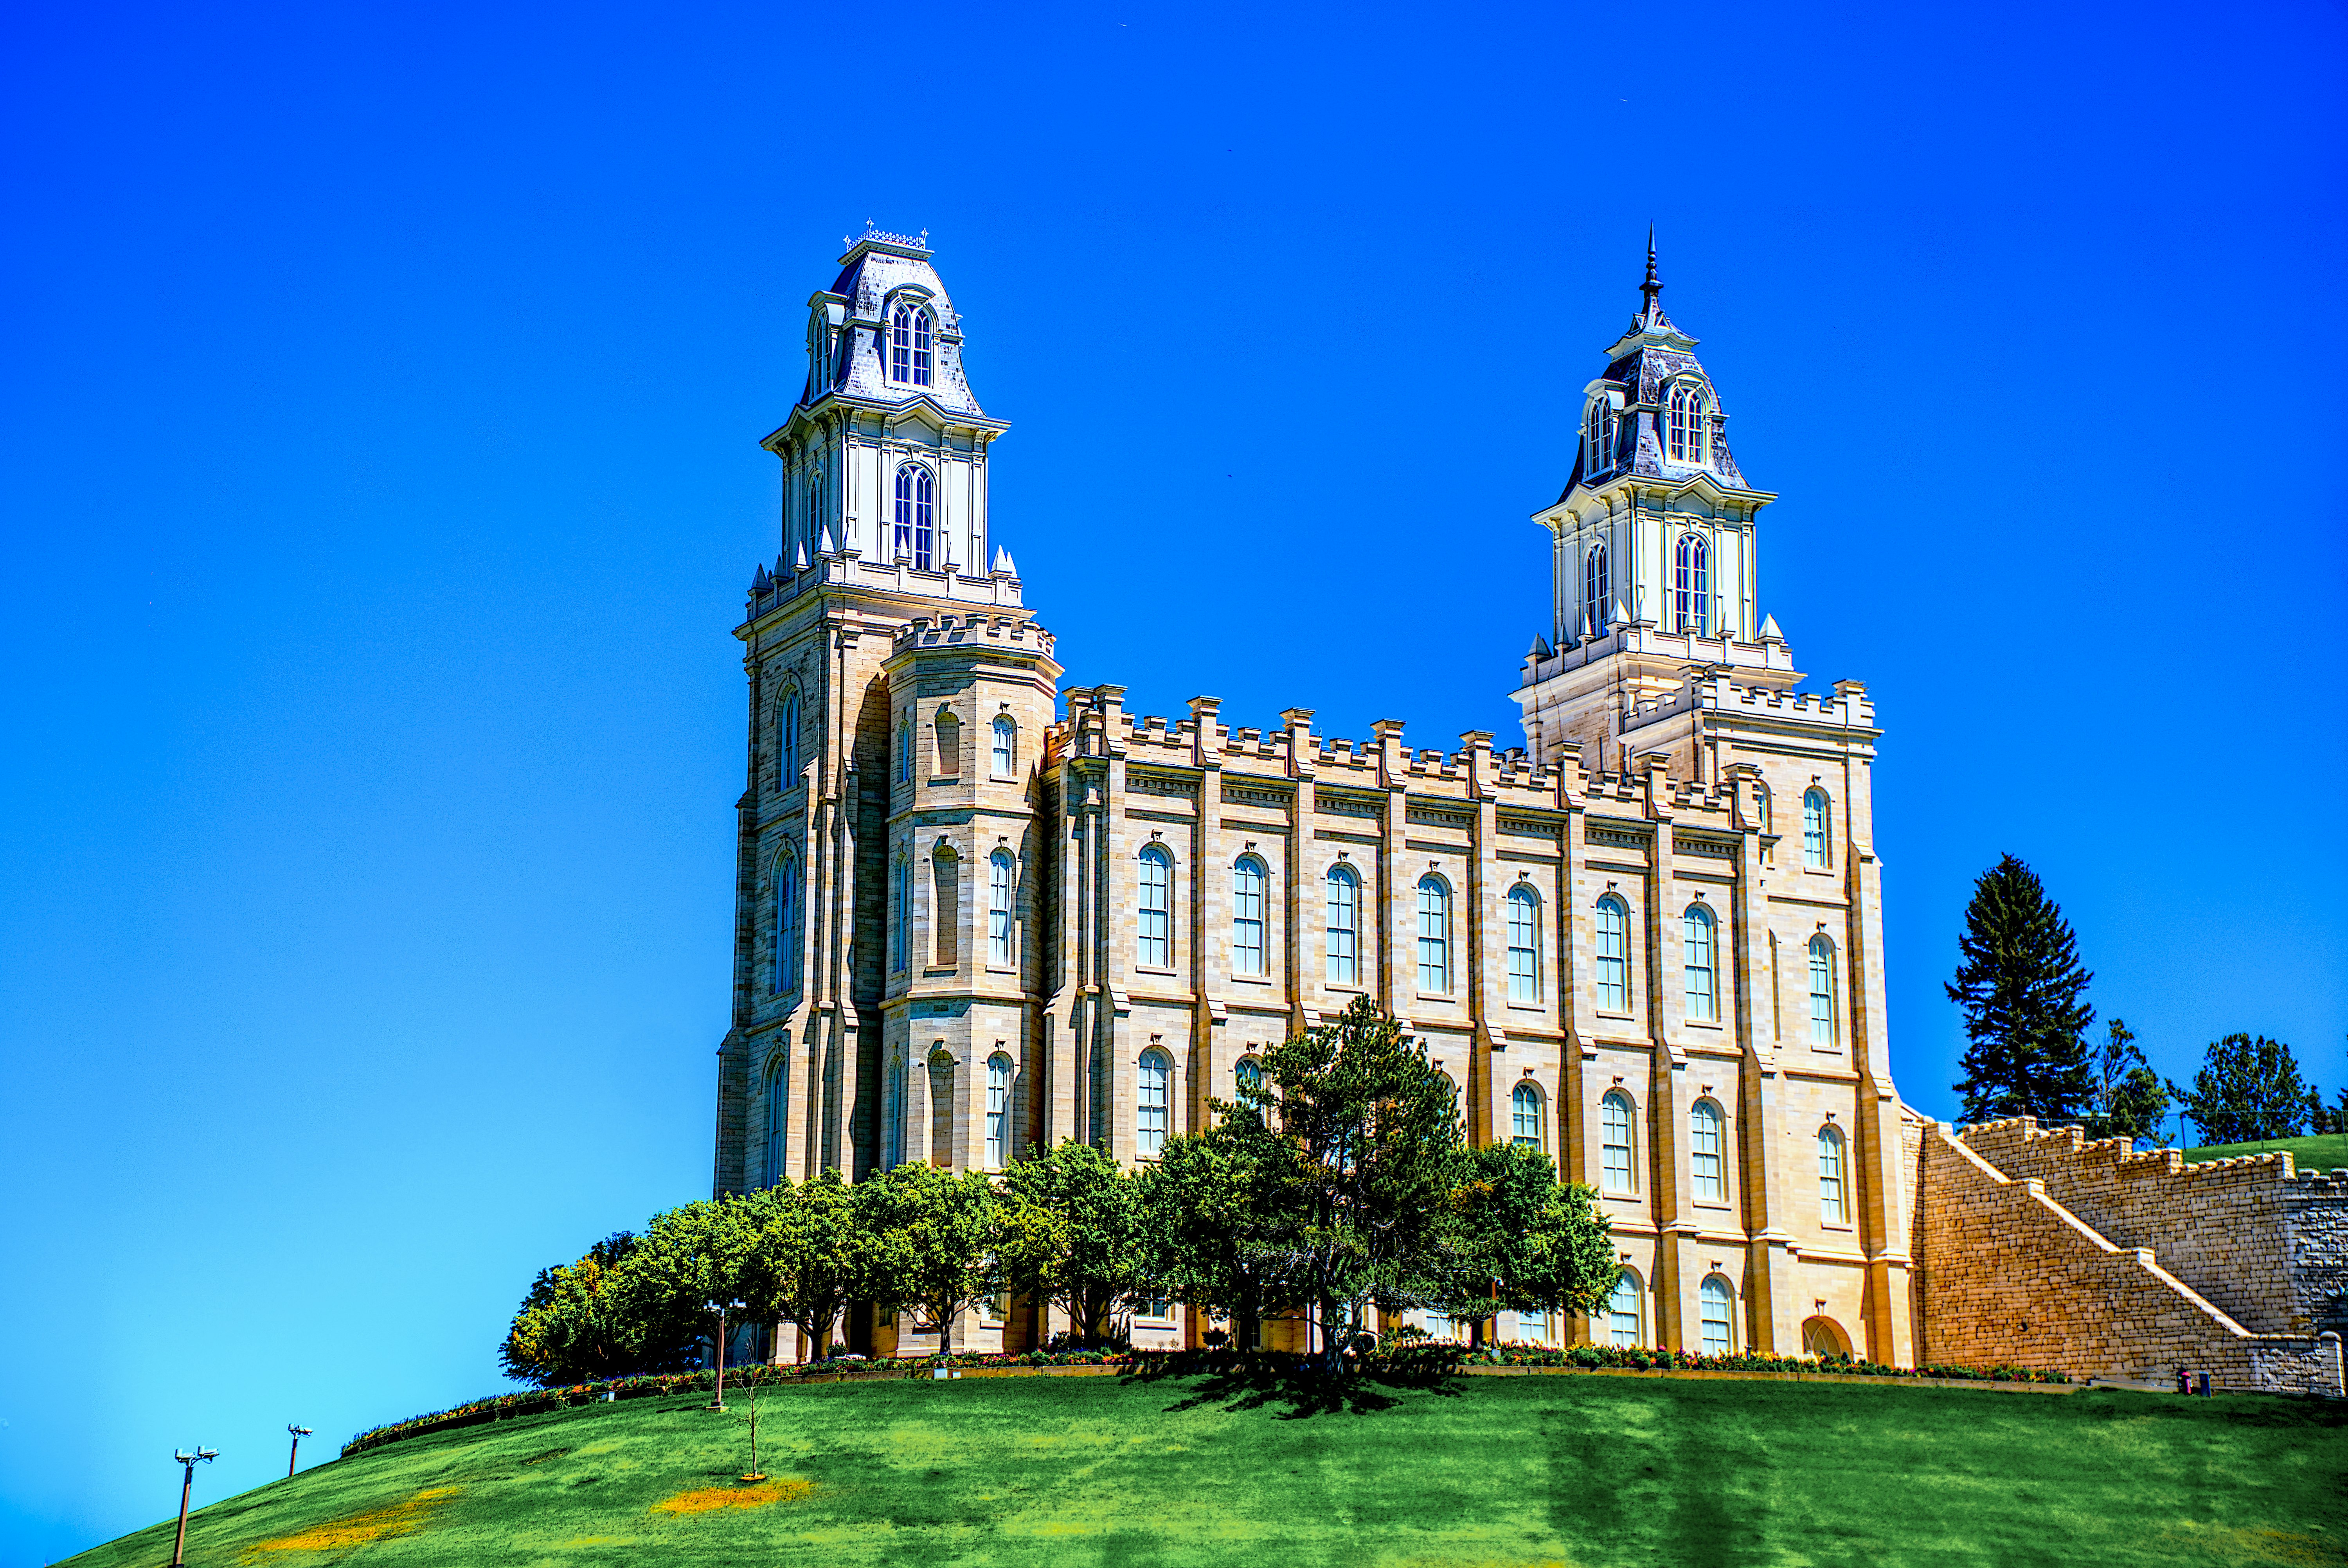 Completed in 1888, this Temple located in Manti, Utah, is one of the few without the Angel Moroni atop the highest spire.